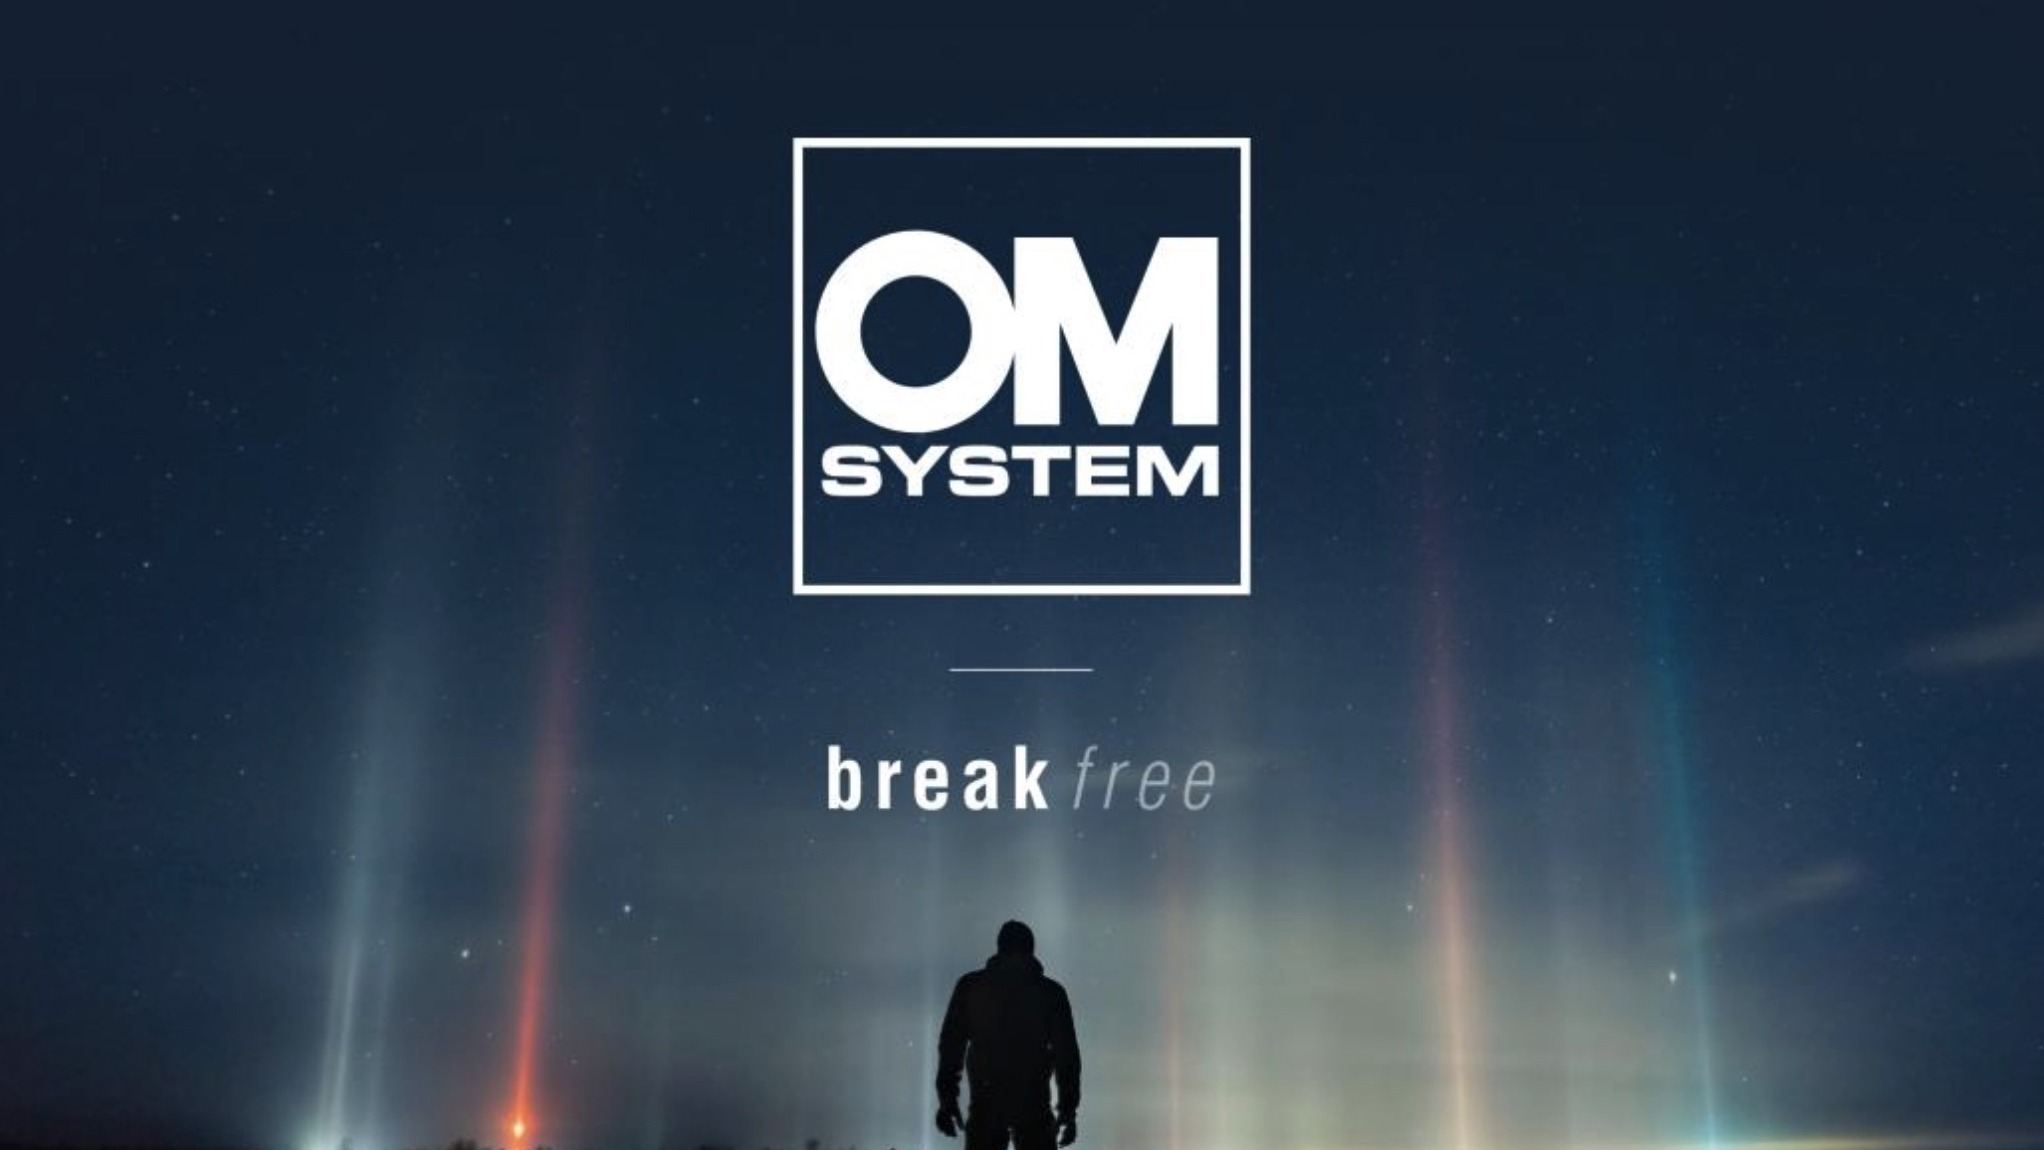 The OM Systems logo and tagline